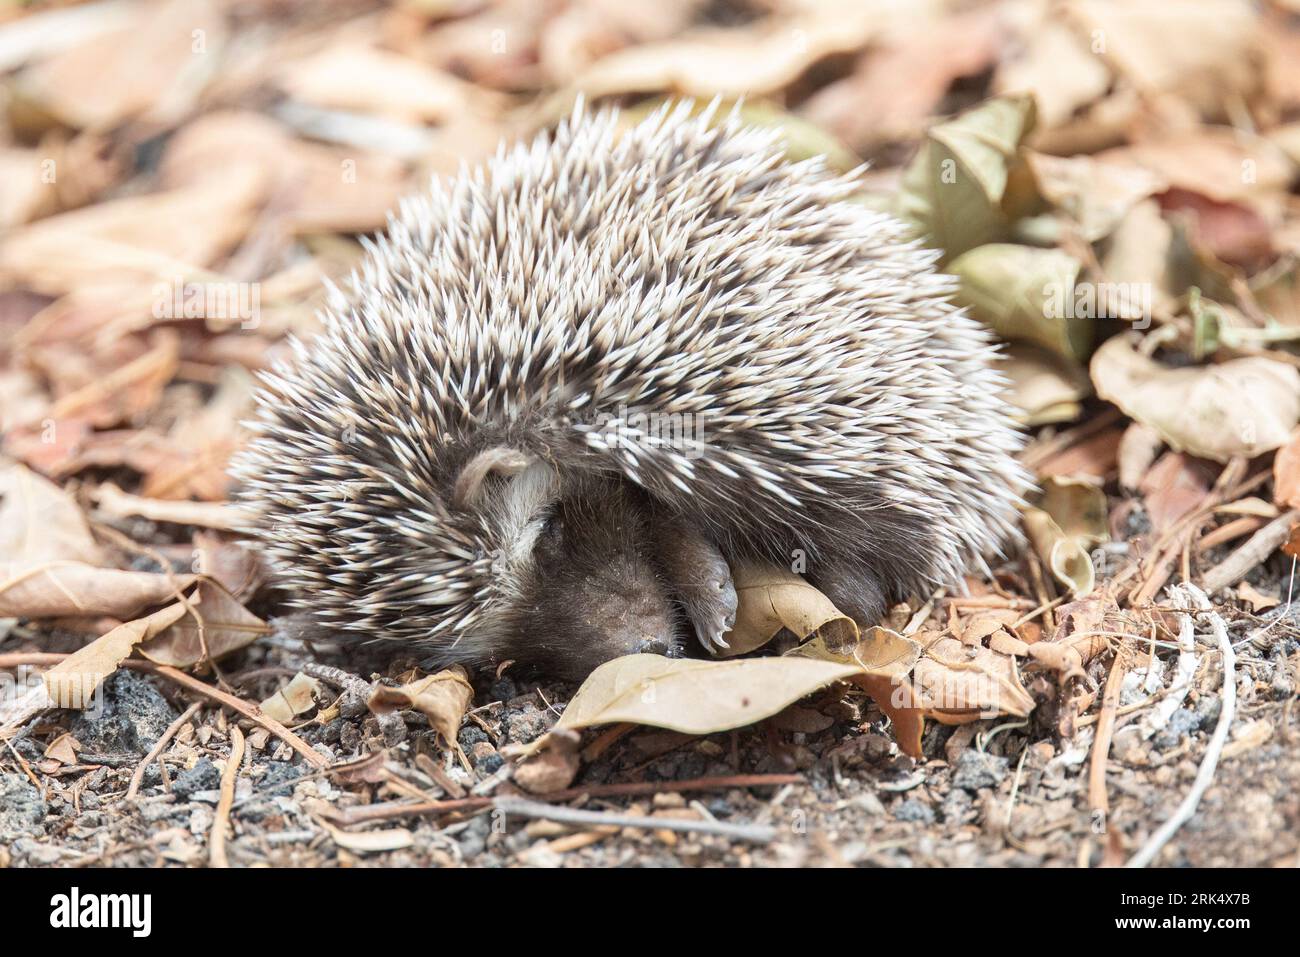 North African hedgehog (Atelerix algirus) sleeping and coiled up on the ground, with leaves producing a brown background, in Fuerteventura, Canary isl Stock Photo